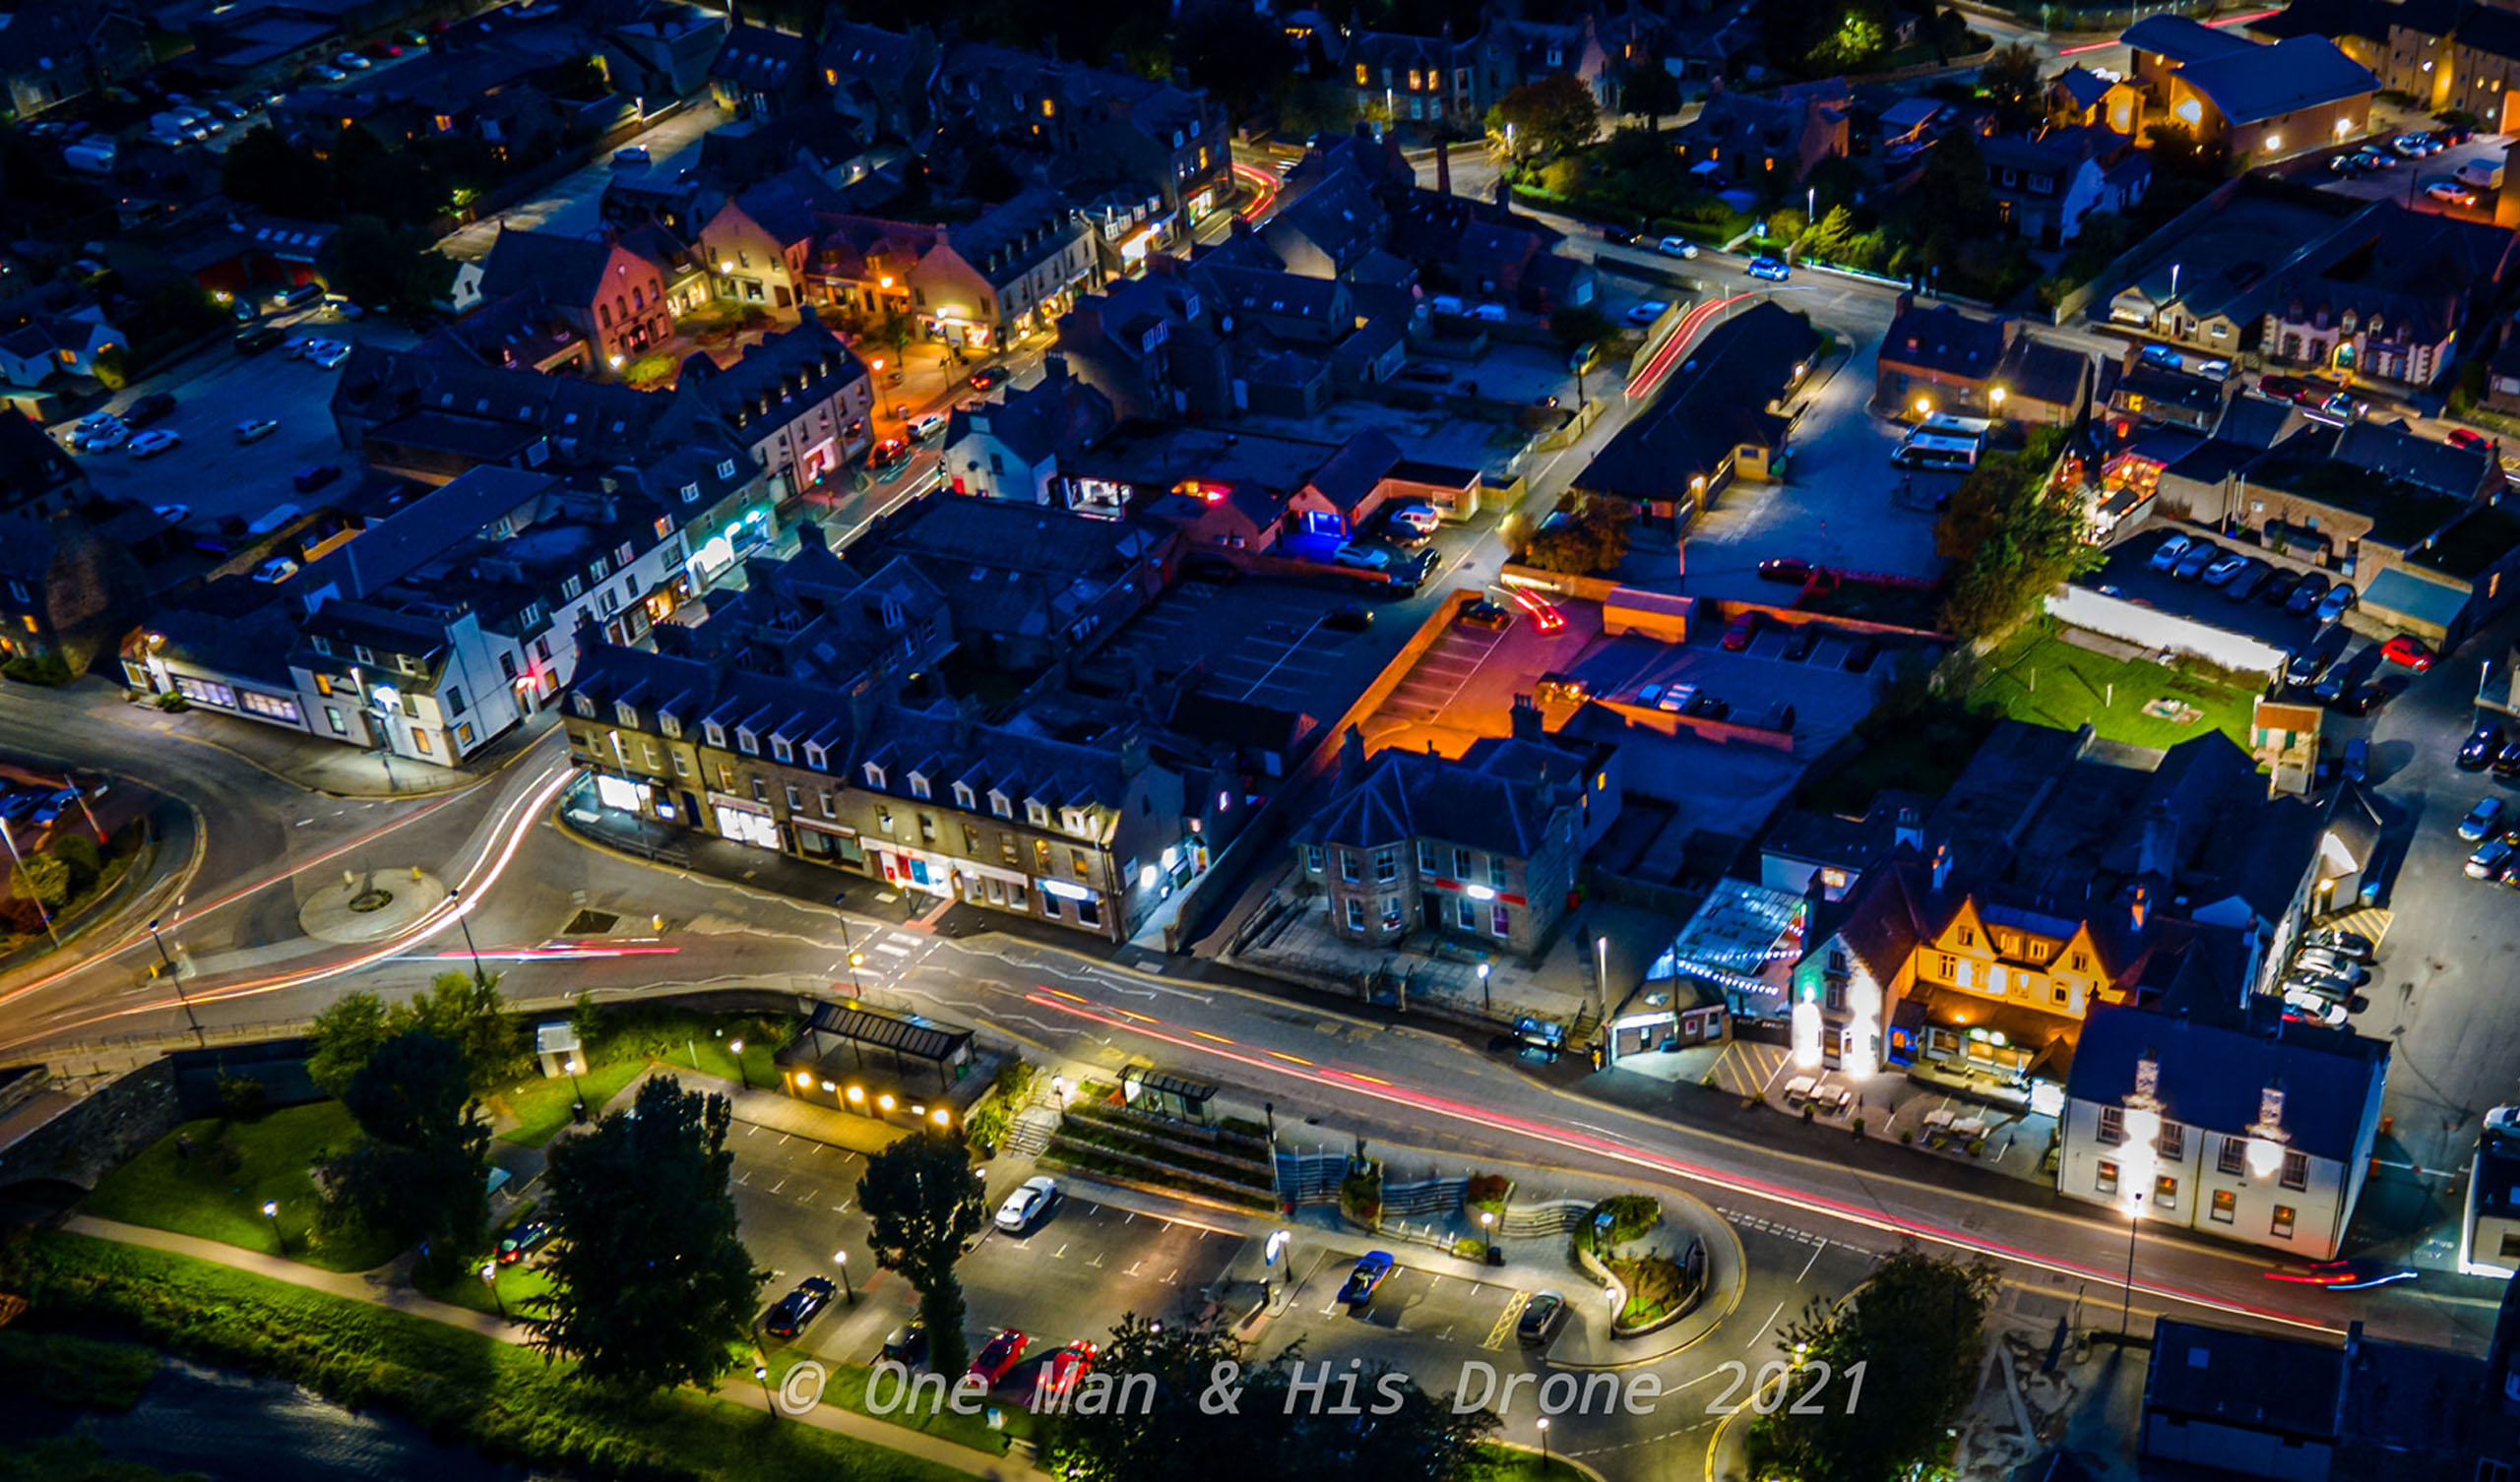 Photograph courtesy of One Man & His Drone - The town of Ellon, Aberdeenshire - Drone footage of Ellon at Night